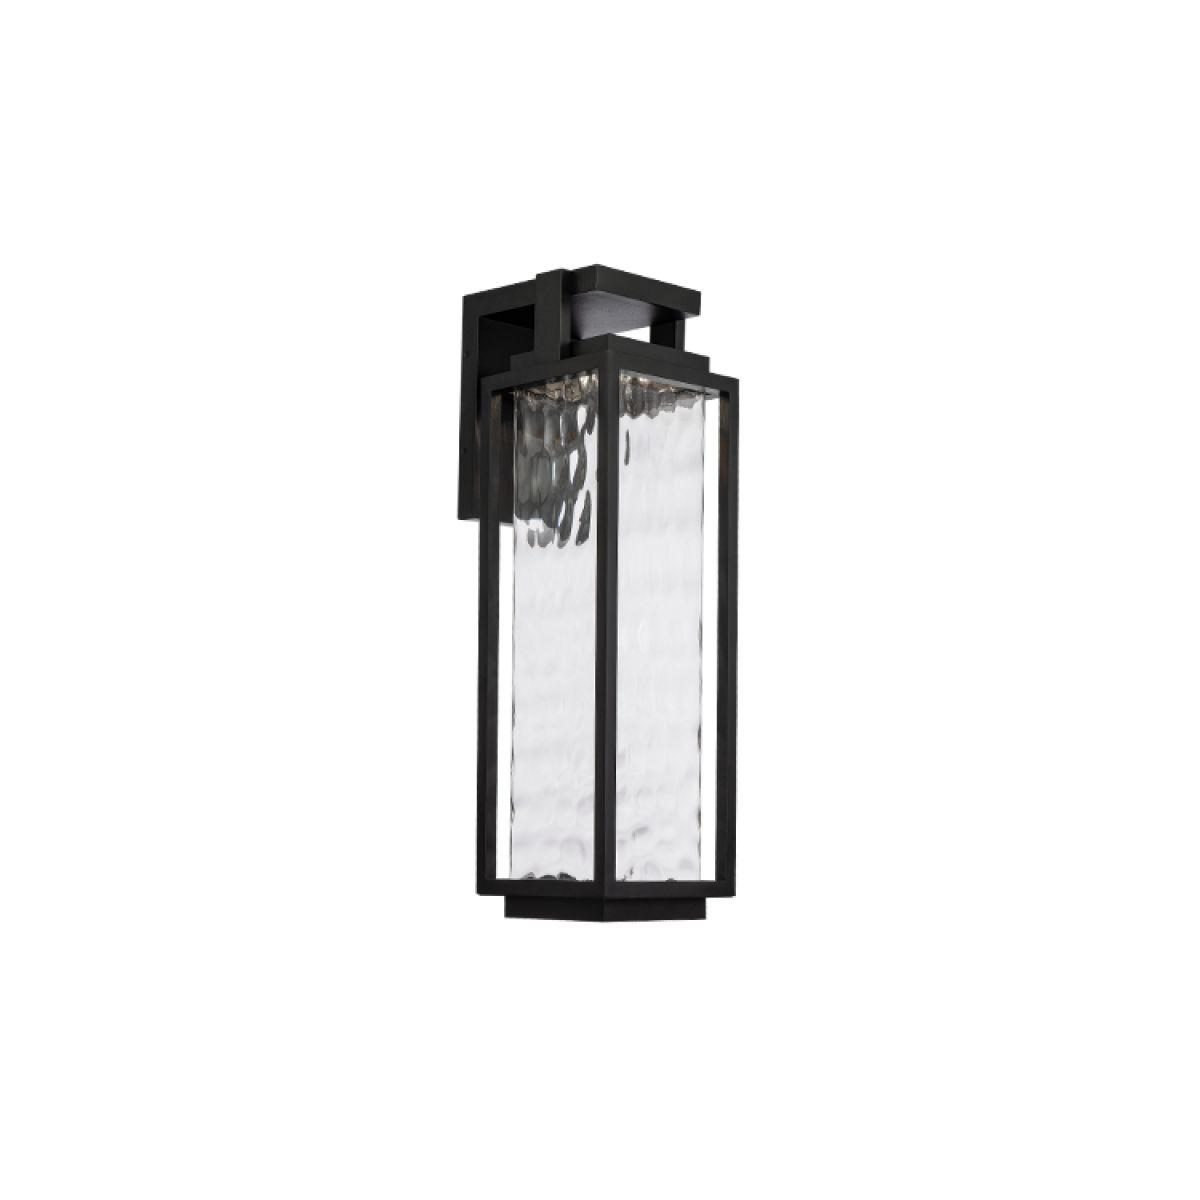 Two If By Sea 25 In. LED Outdoor Wall Sconce 1600 lumens Black Finish